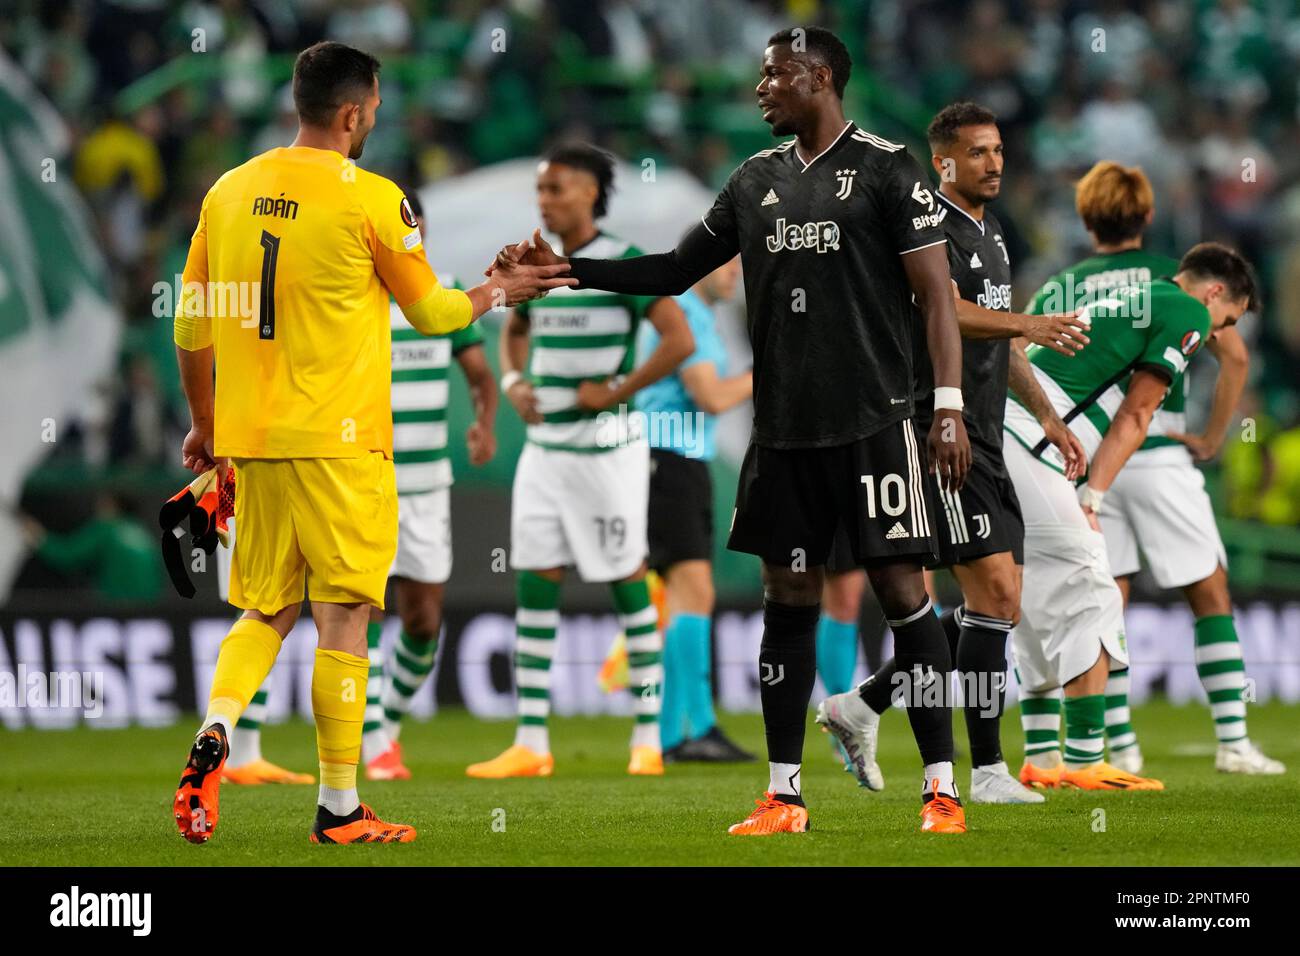 Juventus' Paulo Pogba, right, greets Sporting's goalkeeper Antonio Adan at  the end of the Europa League quarter final second leg soccer match between  Sporting CP and Juventus at the Alvalade stadium in